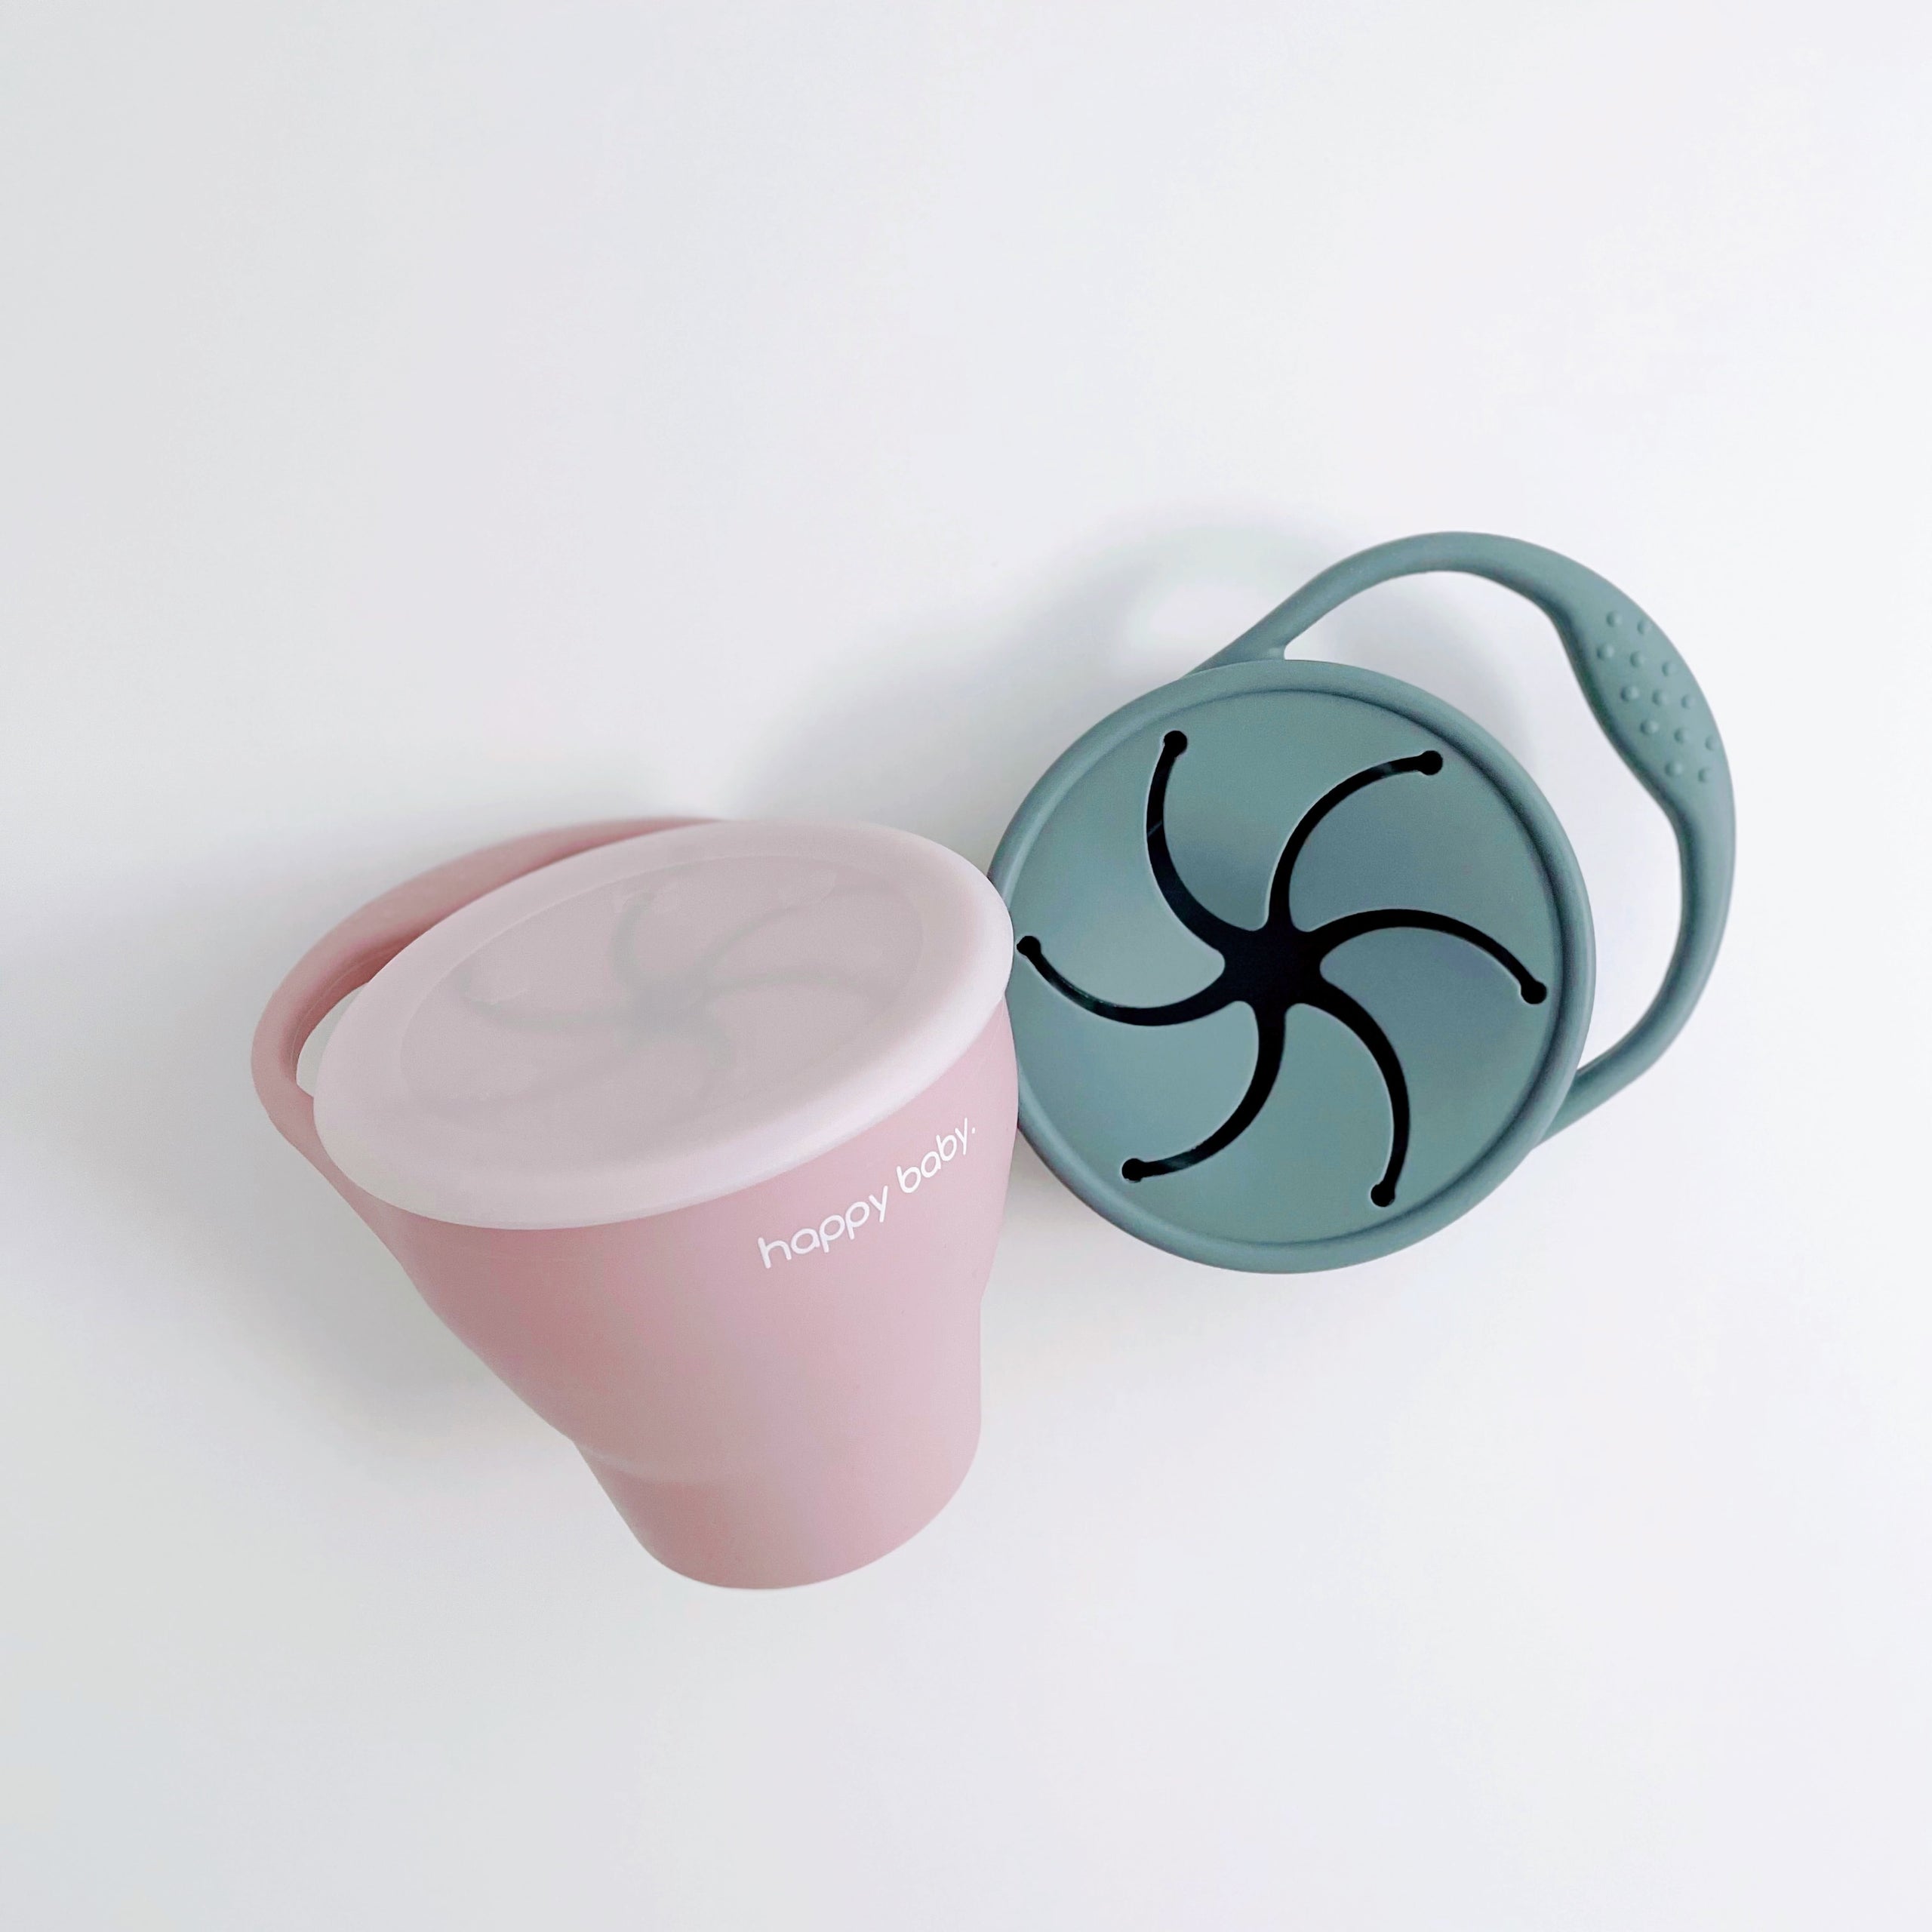 BapronBaby Silicone Collapsible Snack Cup - Grape – Buttercup